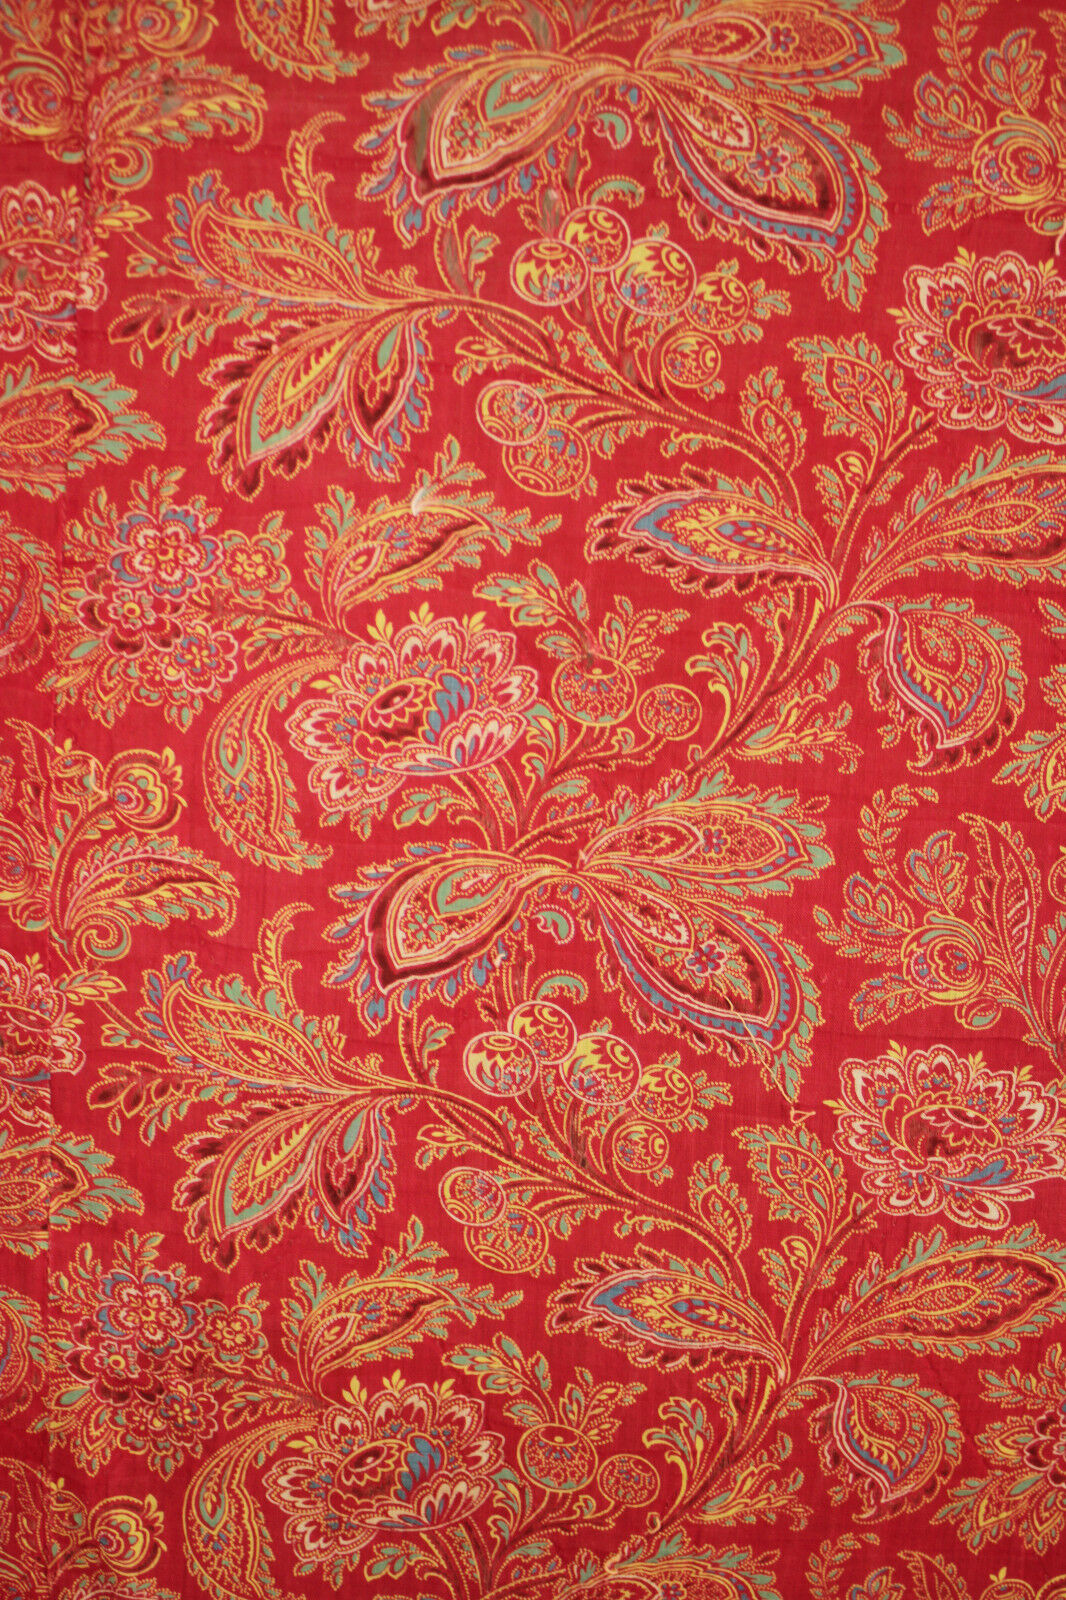 Antique French Fabric Turkey red fragmented panel 1830-50 printed cotton paisley